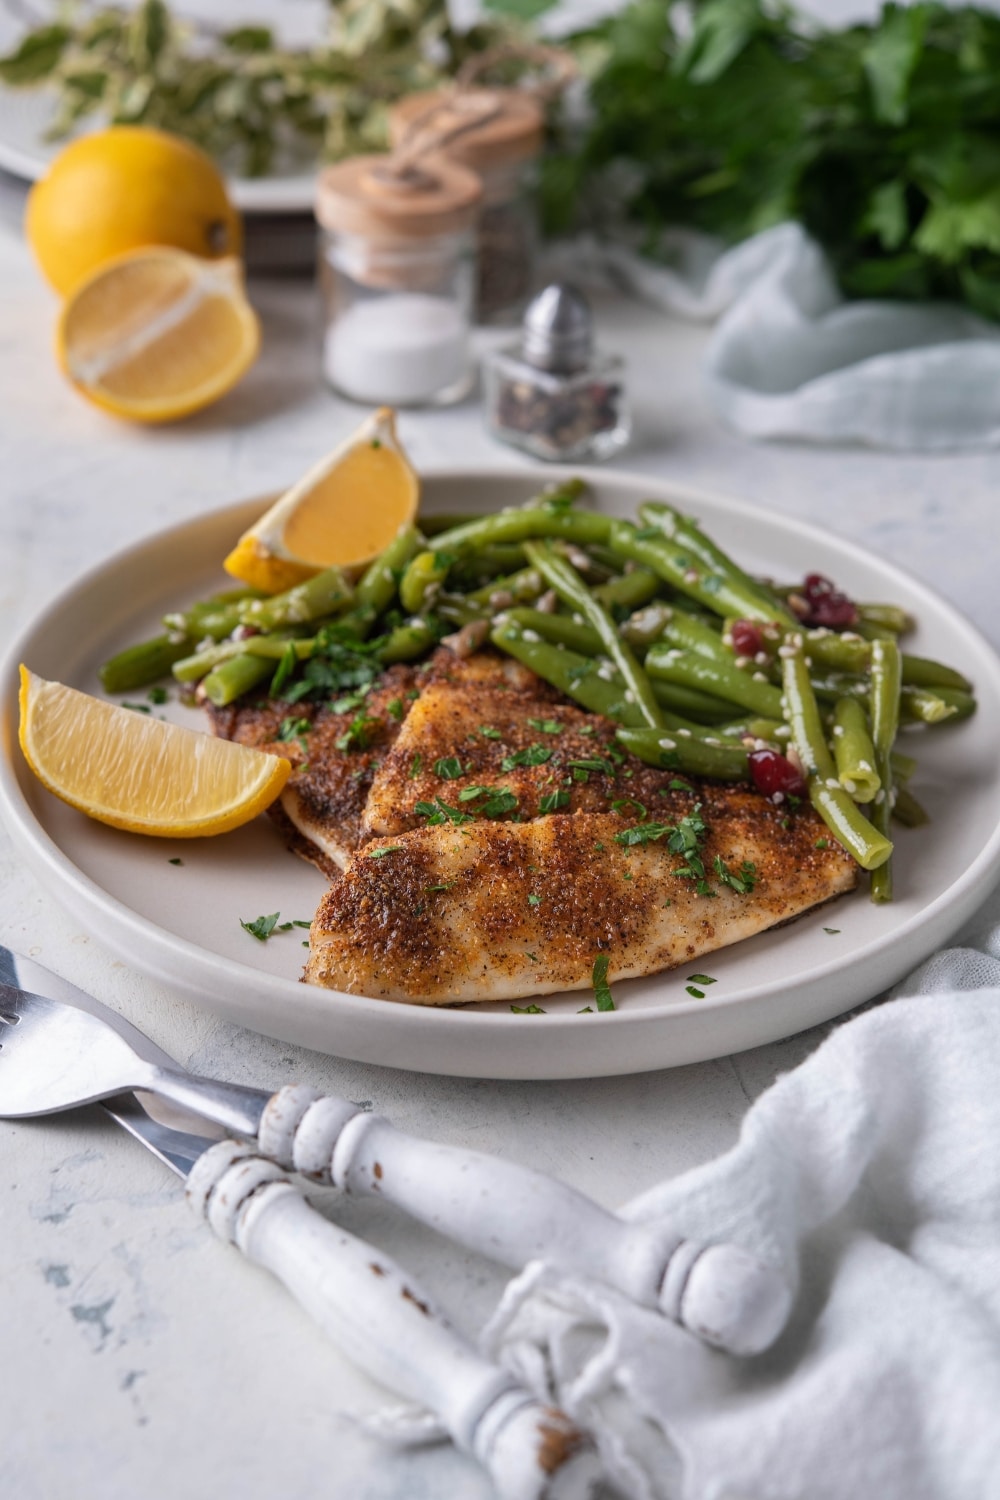 Two grilled tilapia filets with sauteed green beans and lemon wedges on a white plate.